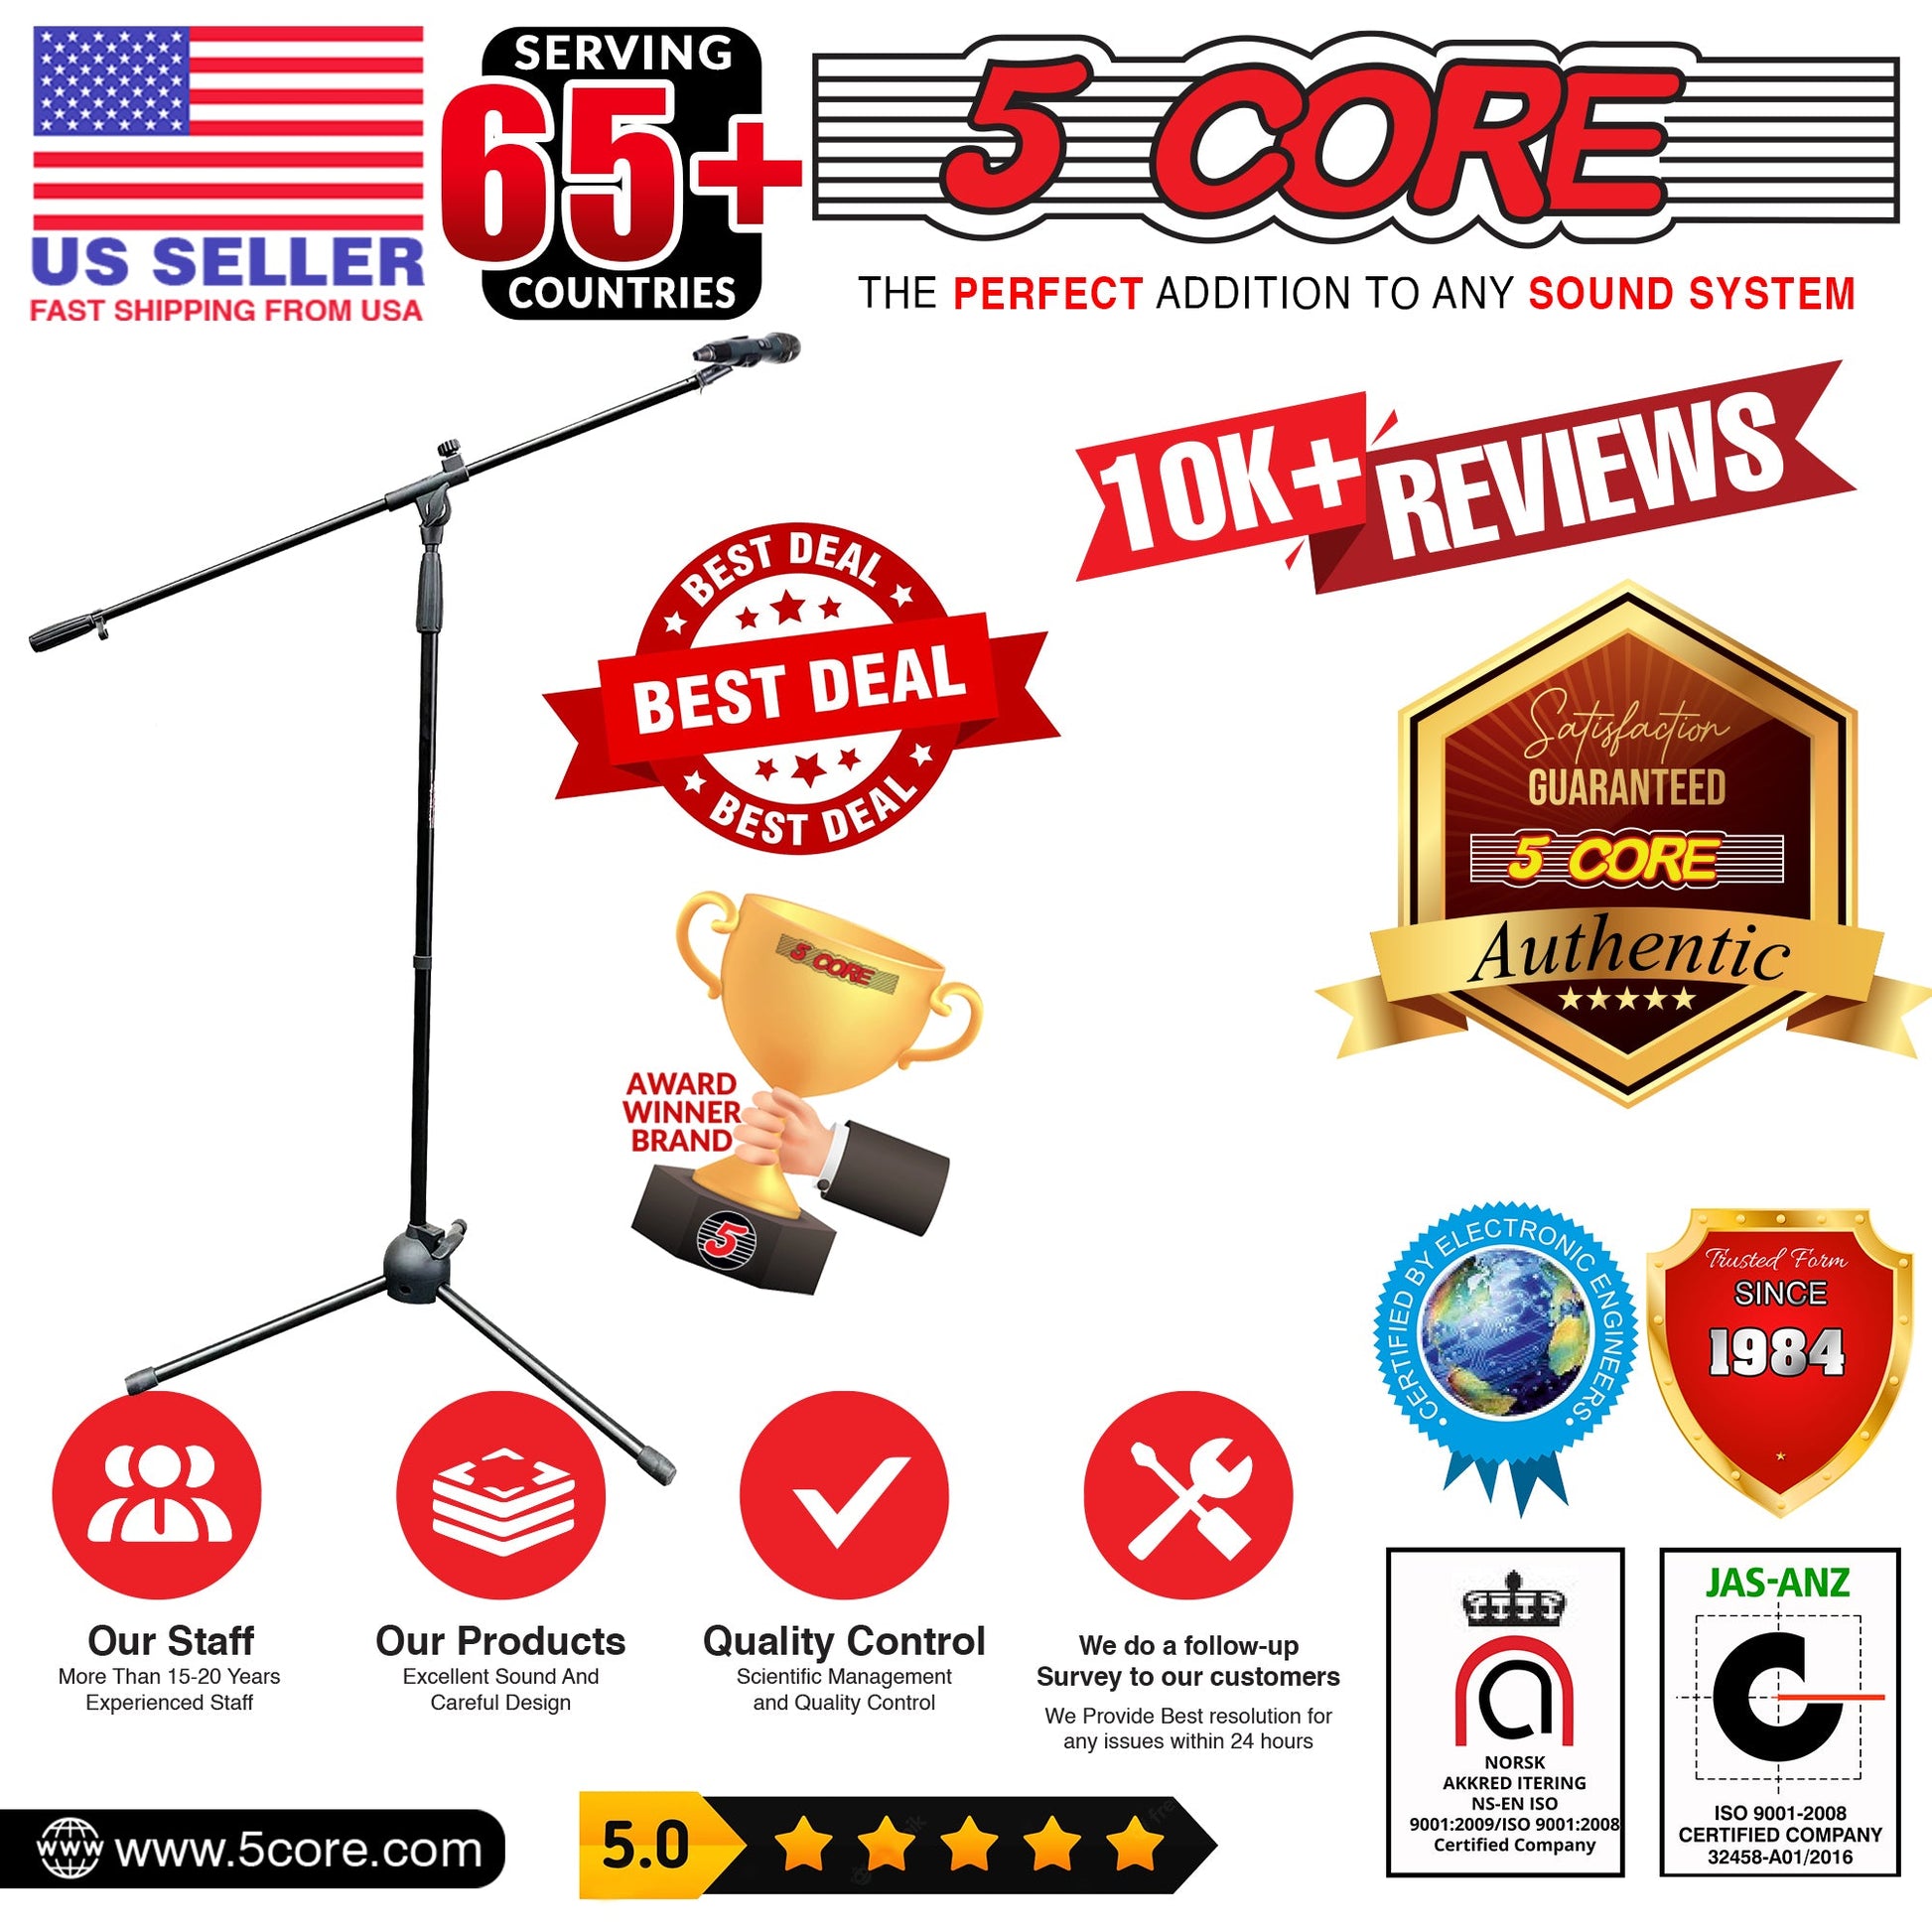 5 Core Foldable Tripod Mic Stand + Premium Vocal Dynamic Cardioid Mic Combo: Adjustable height, telescoping boom arm, secure tension lock. Includes 16ft XLR cable, mic clip, on/off switch. Ideal for karaoke MS 080 +ND58-10